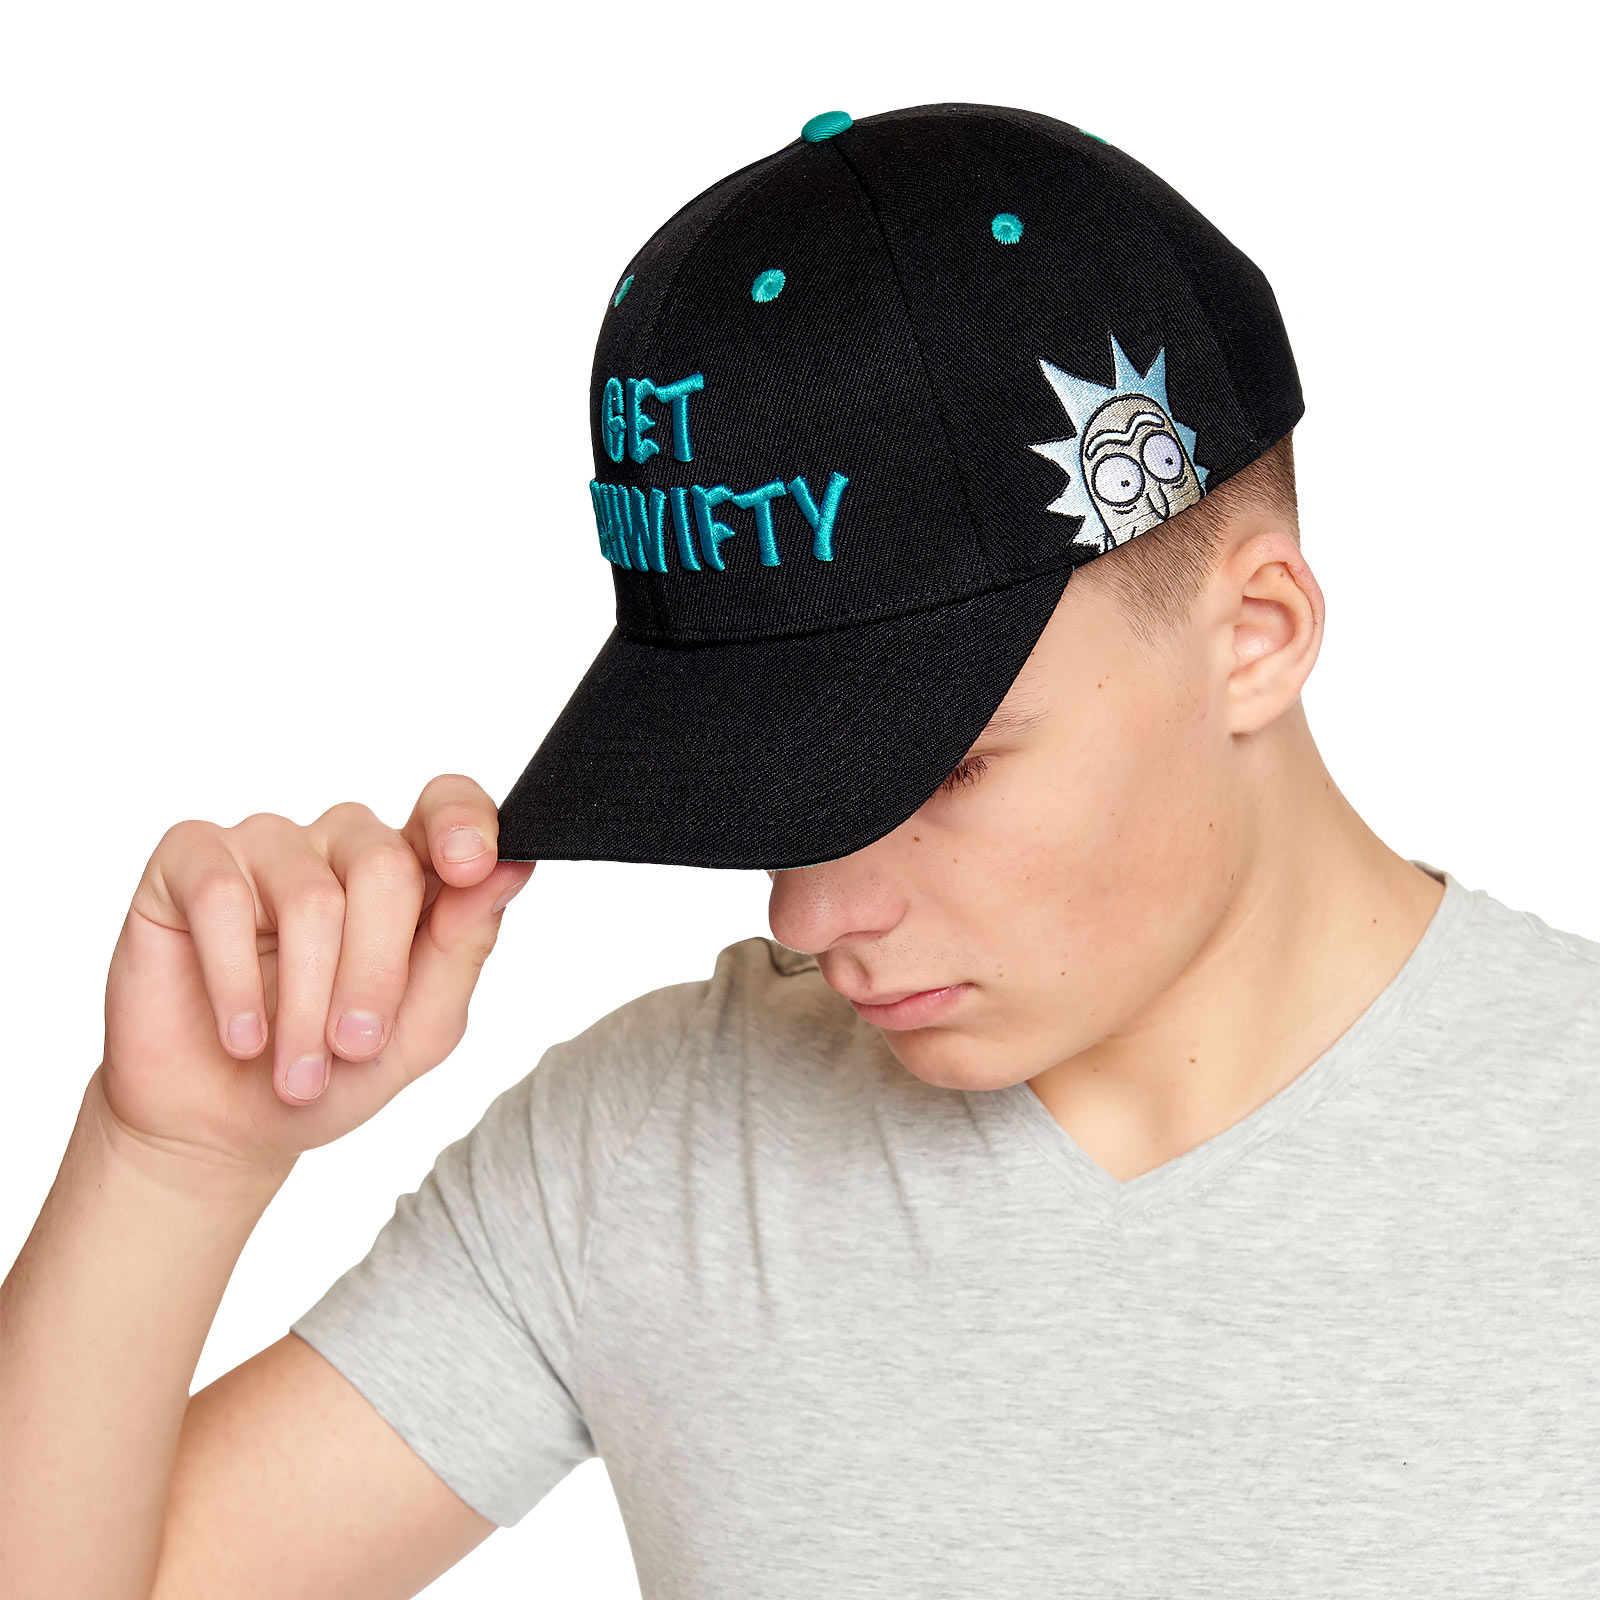 Rick and Morty - Get Schwifty Baseball Cap Black